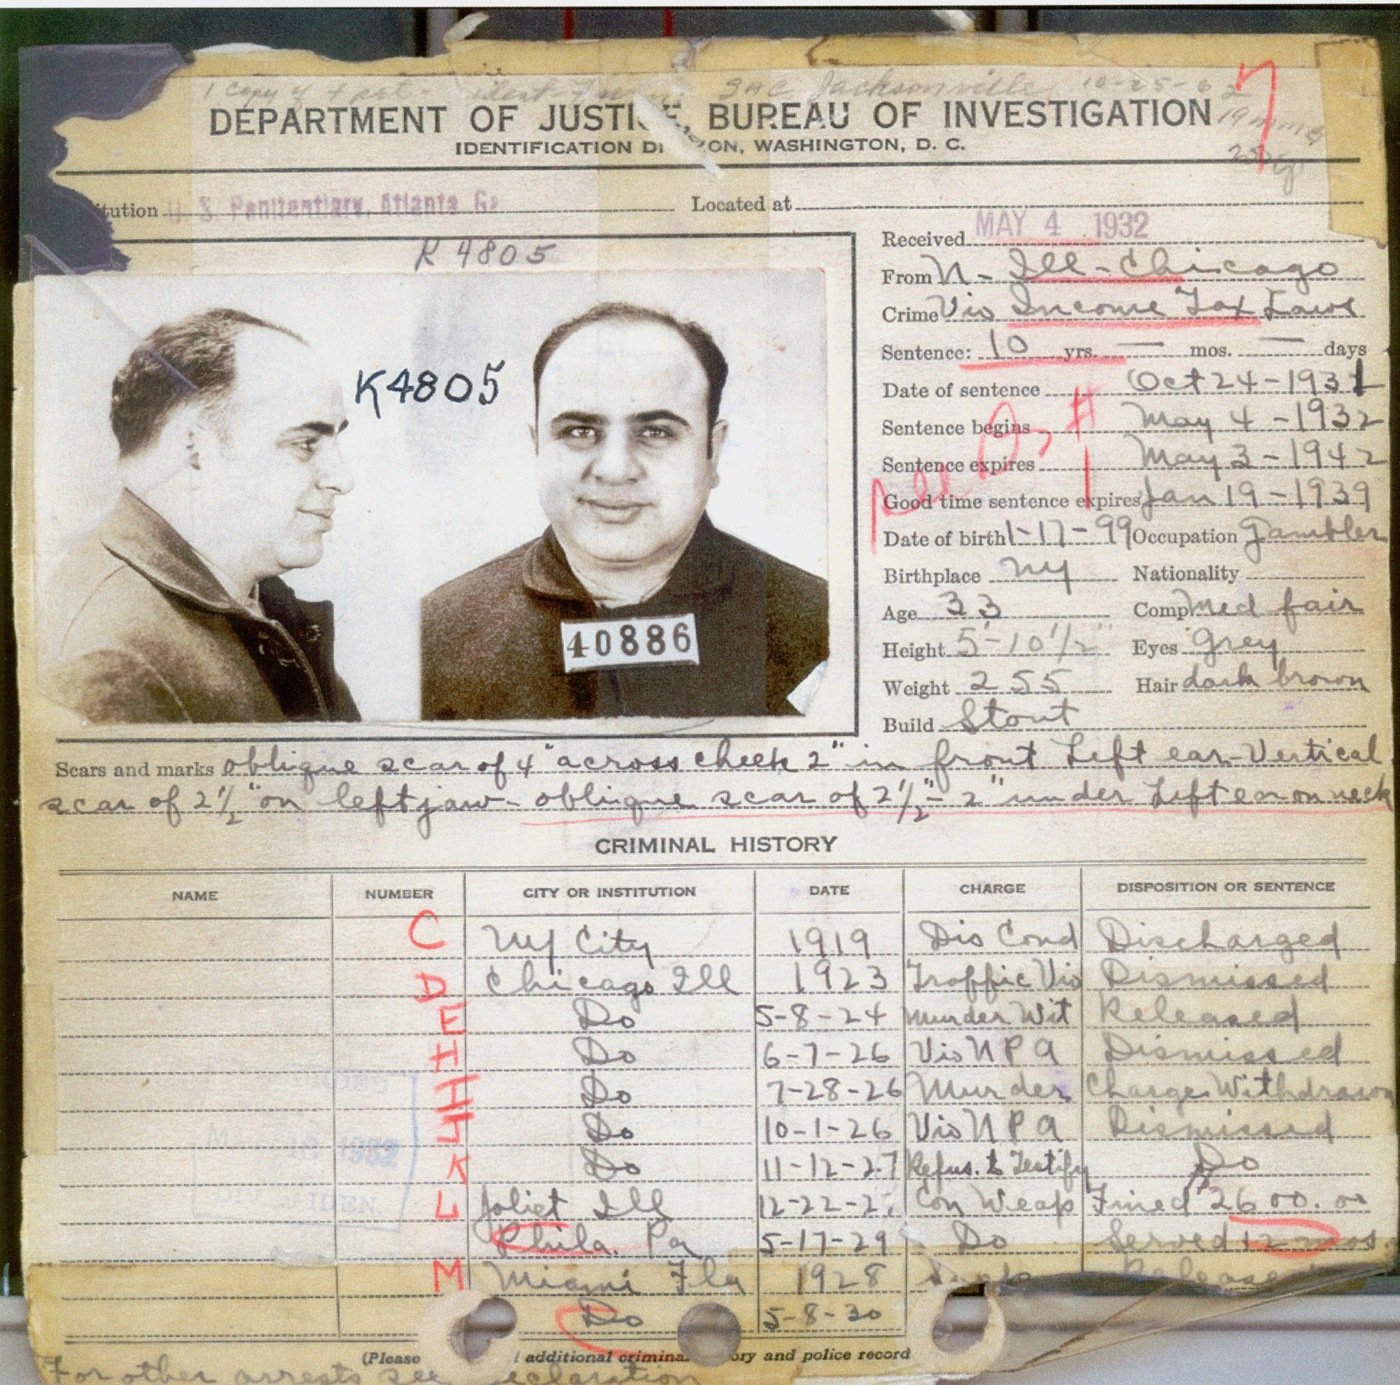 Arrest record for Al Capone dated May 4. 1932.